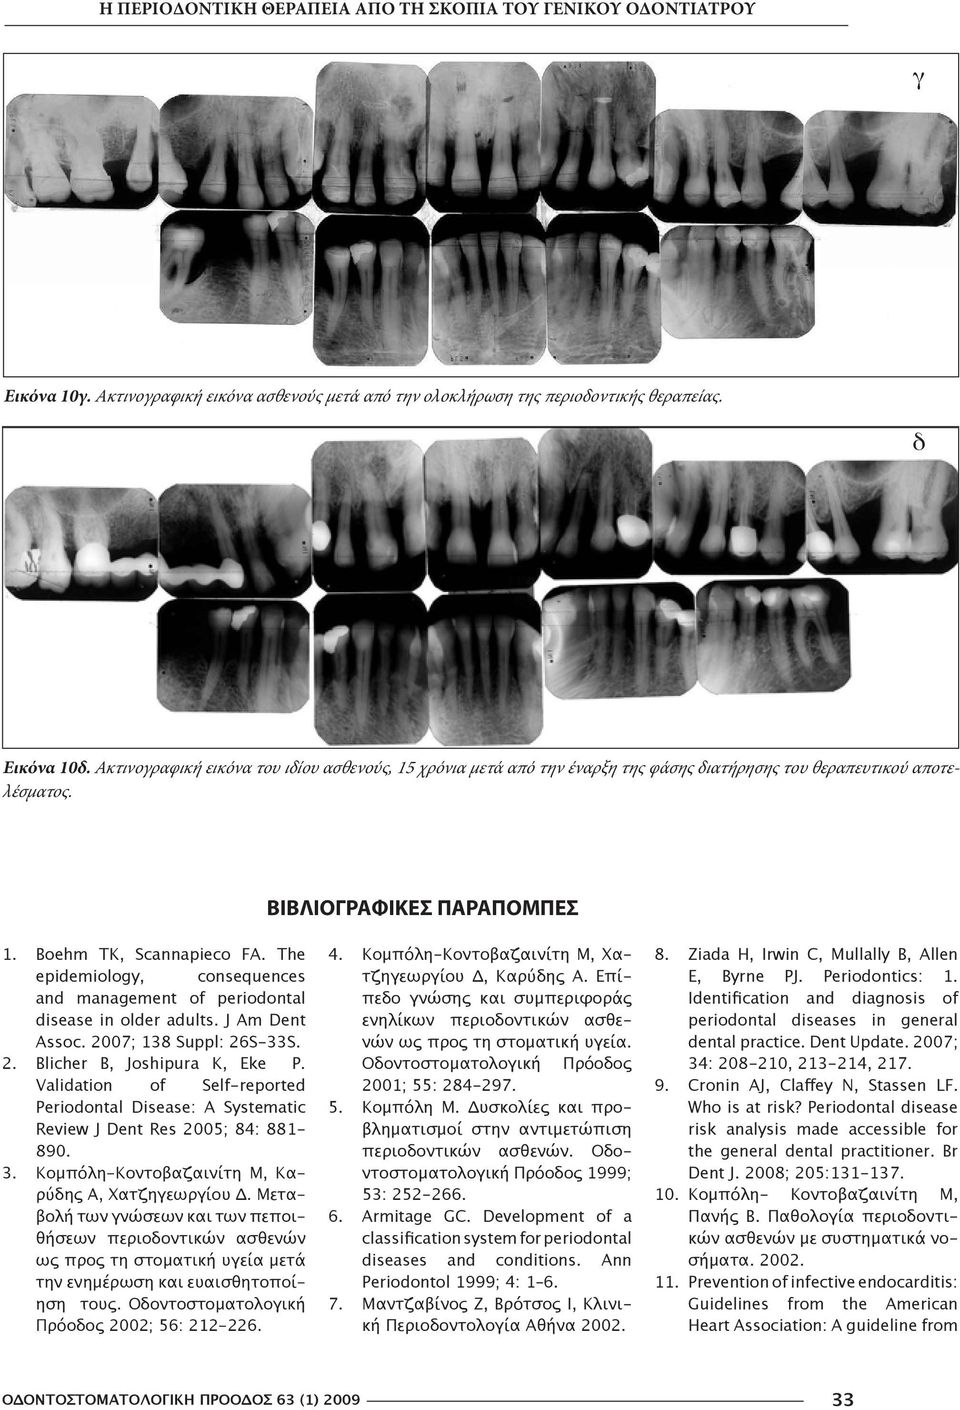 The epidemiology, consequences and management of periodontal disease in older adults. J Am Dent Assoc. 2007; 138 Suppl: 26S-33S. 2. Blicher B, Joshipura K, Eke P.